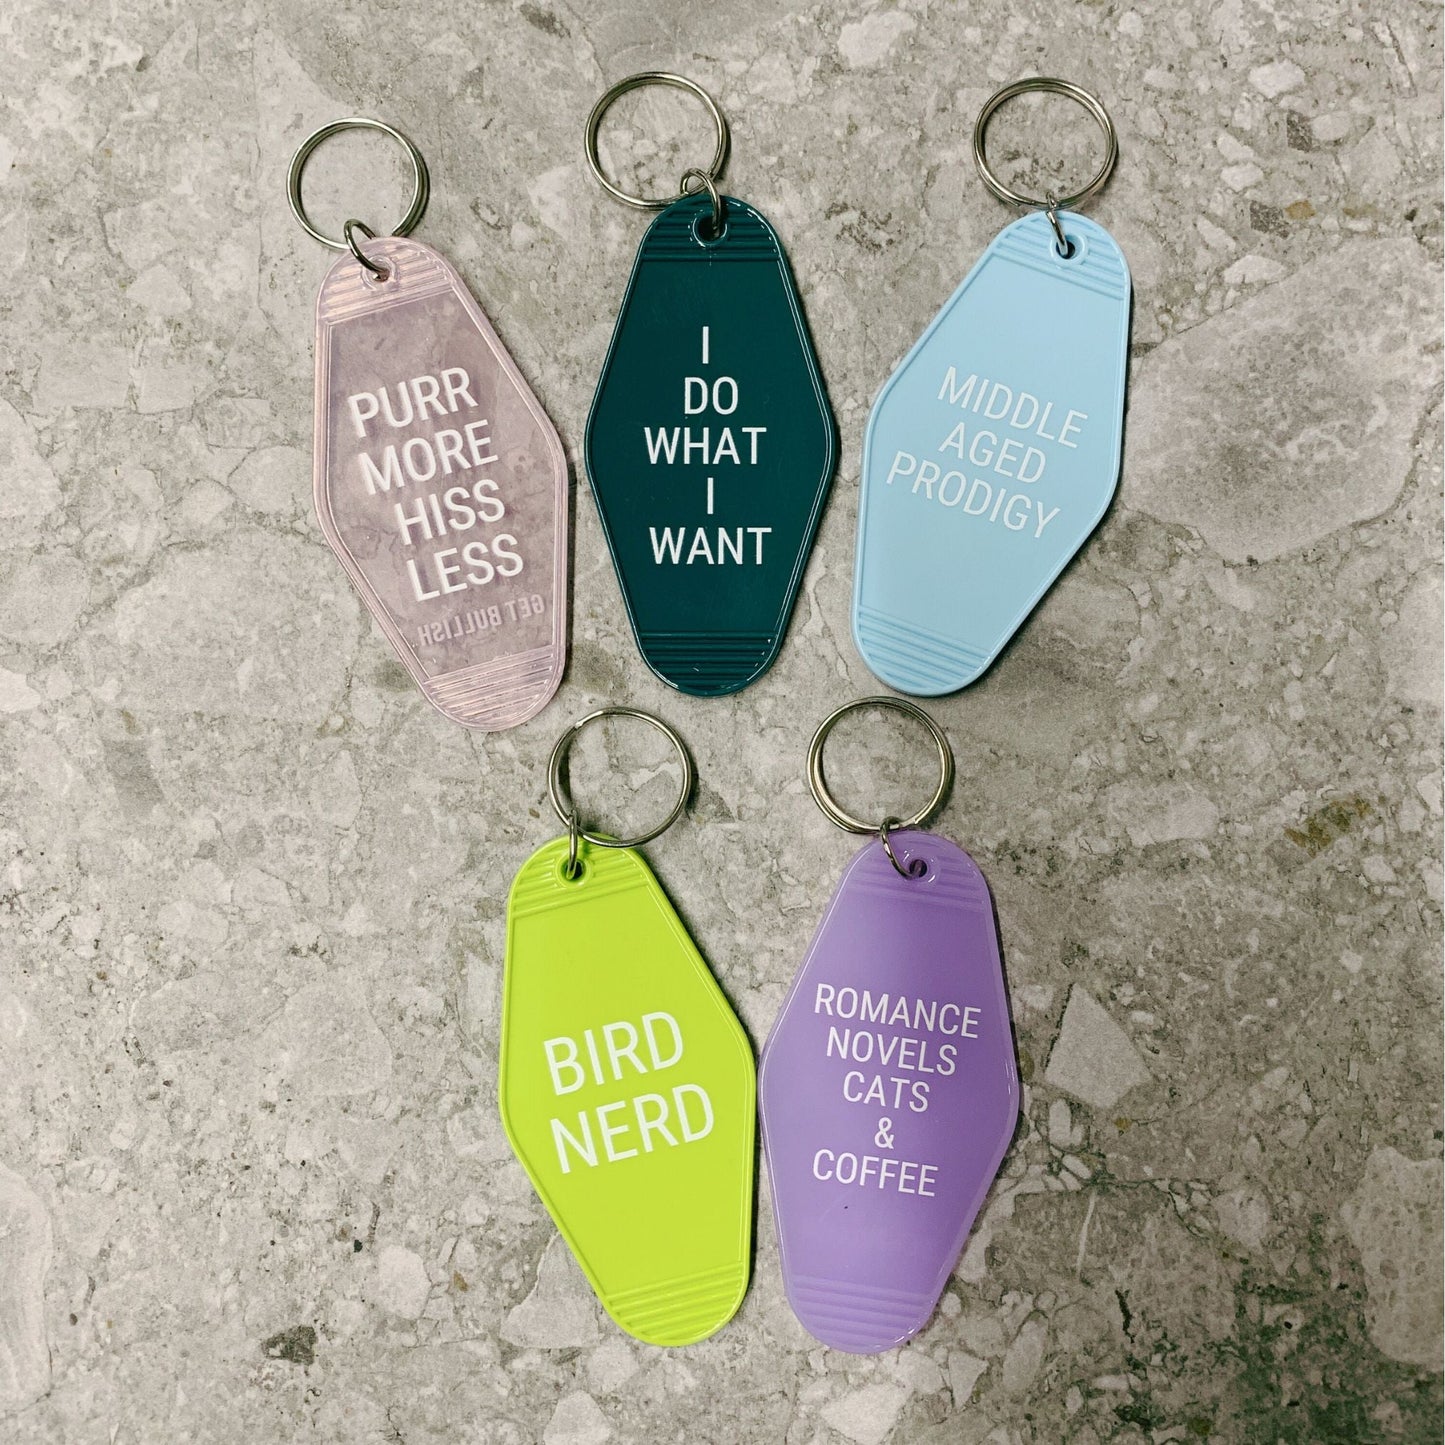 Purr More Hiss Less Motel Style Keychain in Pink Translucent